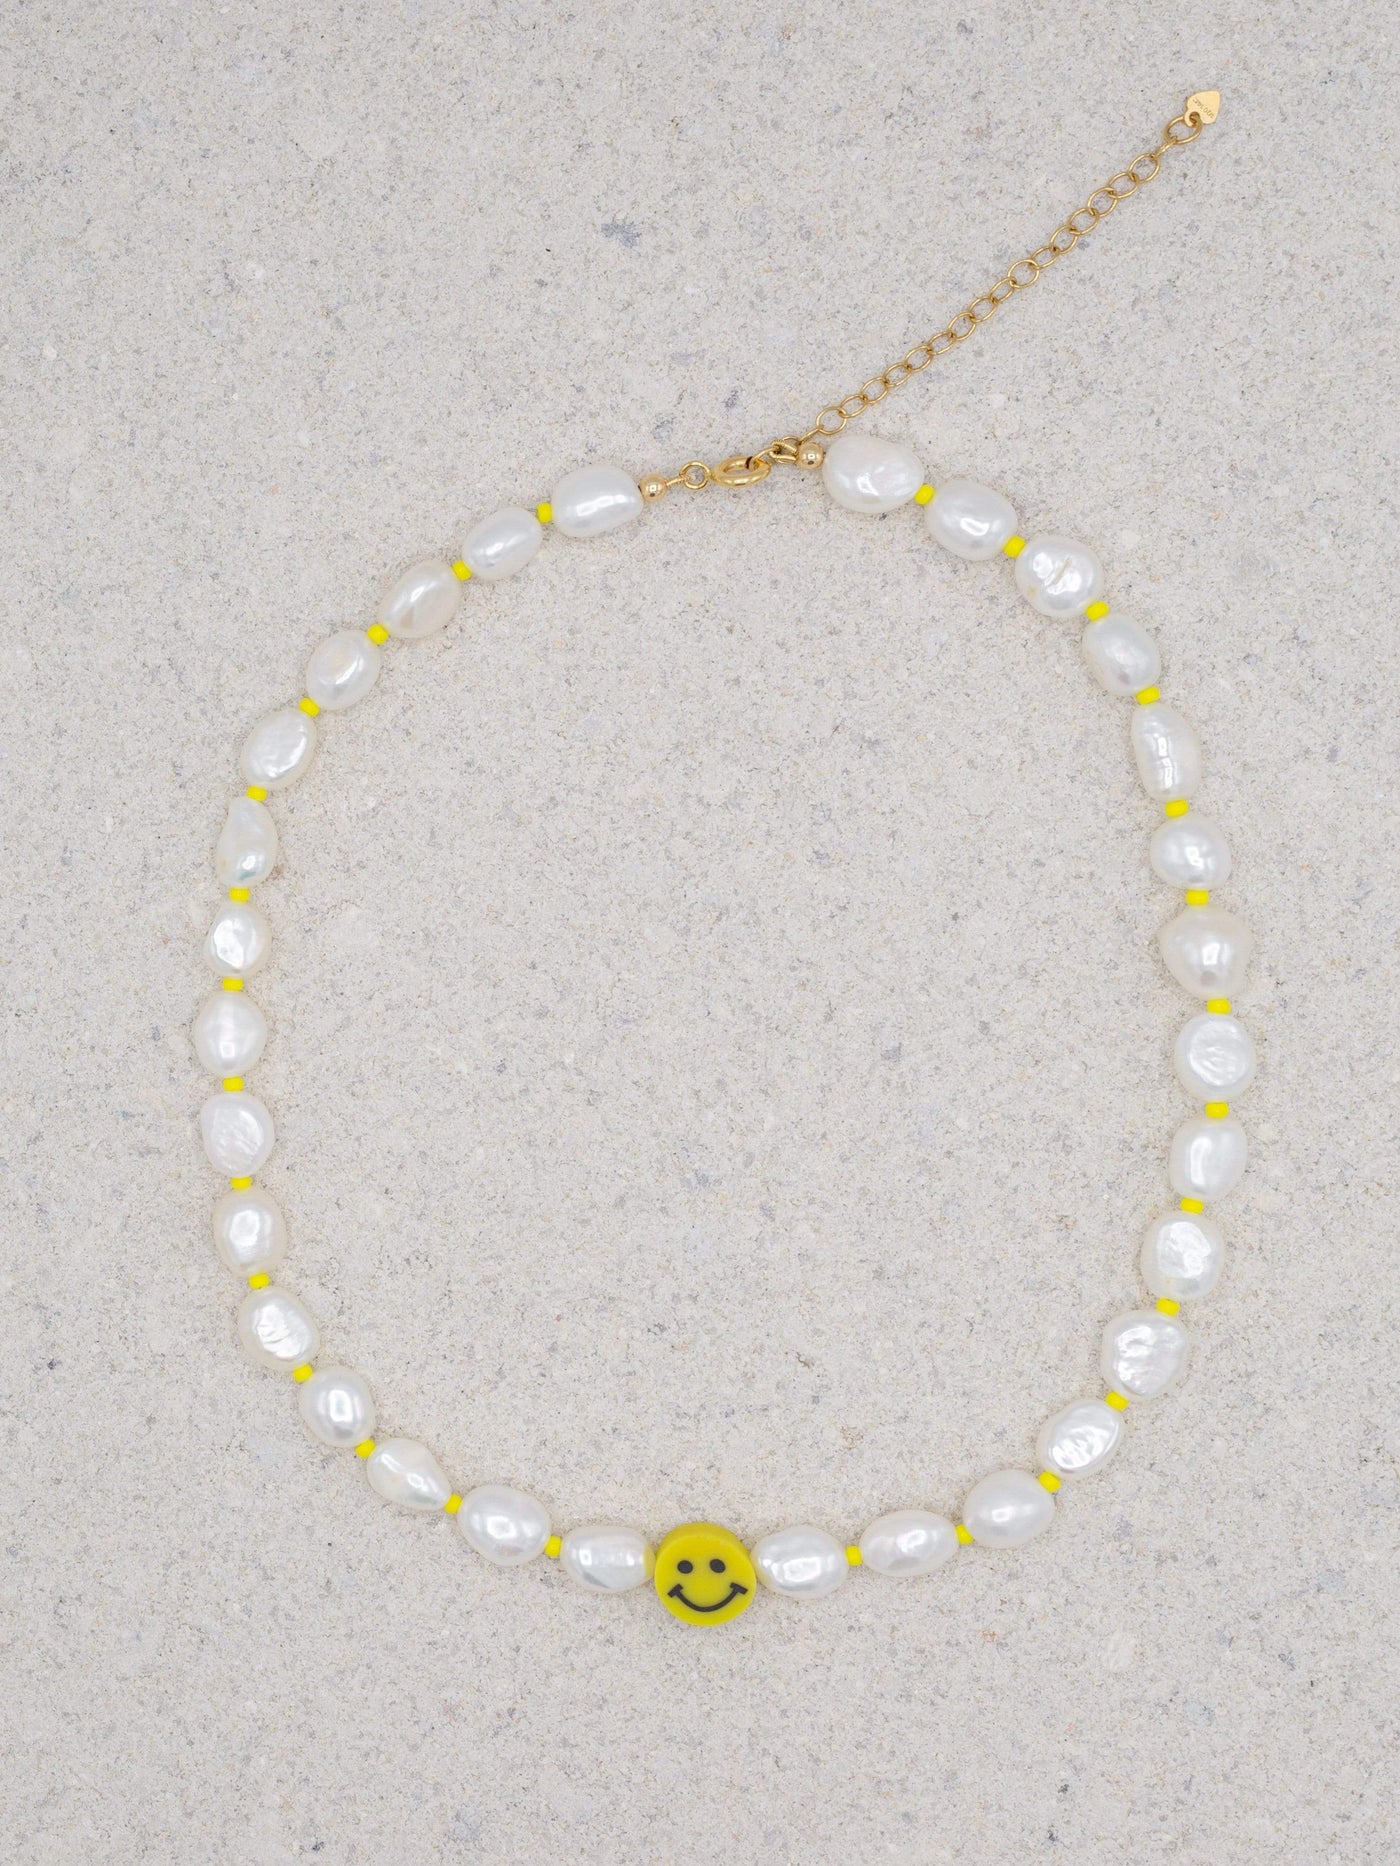 KIKICHIC | NYC | Smiley Face Freshwater Pearl Beaded Choker Necklace |  Yellow Happy Face Beaded Pearl Necklace